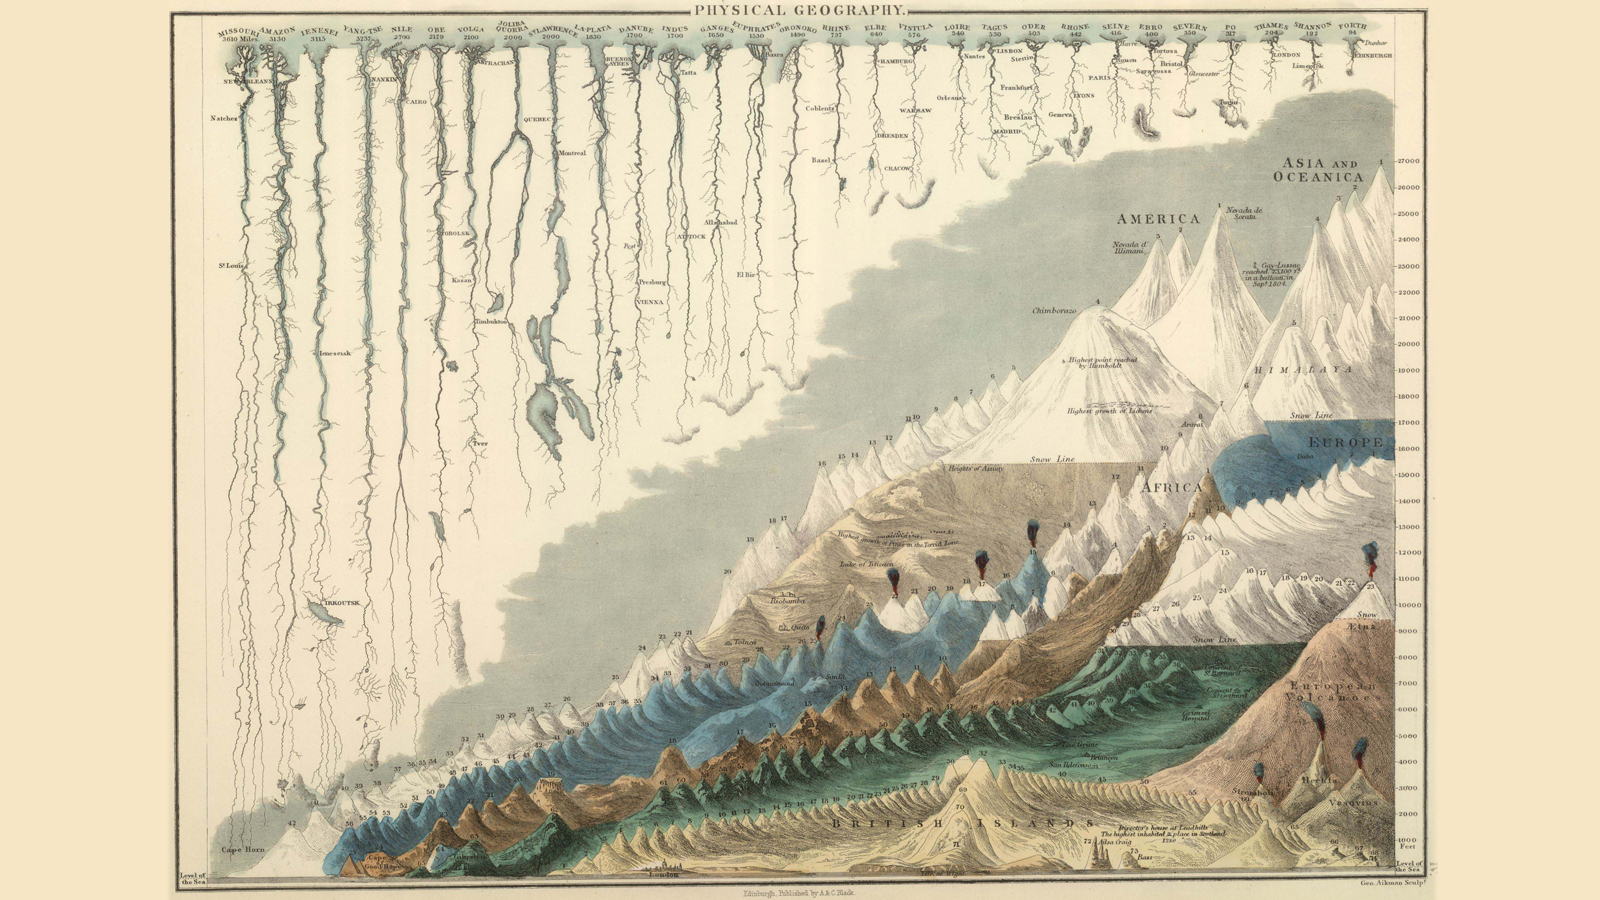 the longest rivers and the tallest mountains in one exquisite graphic, geography